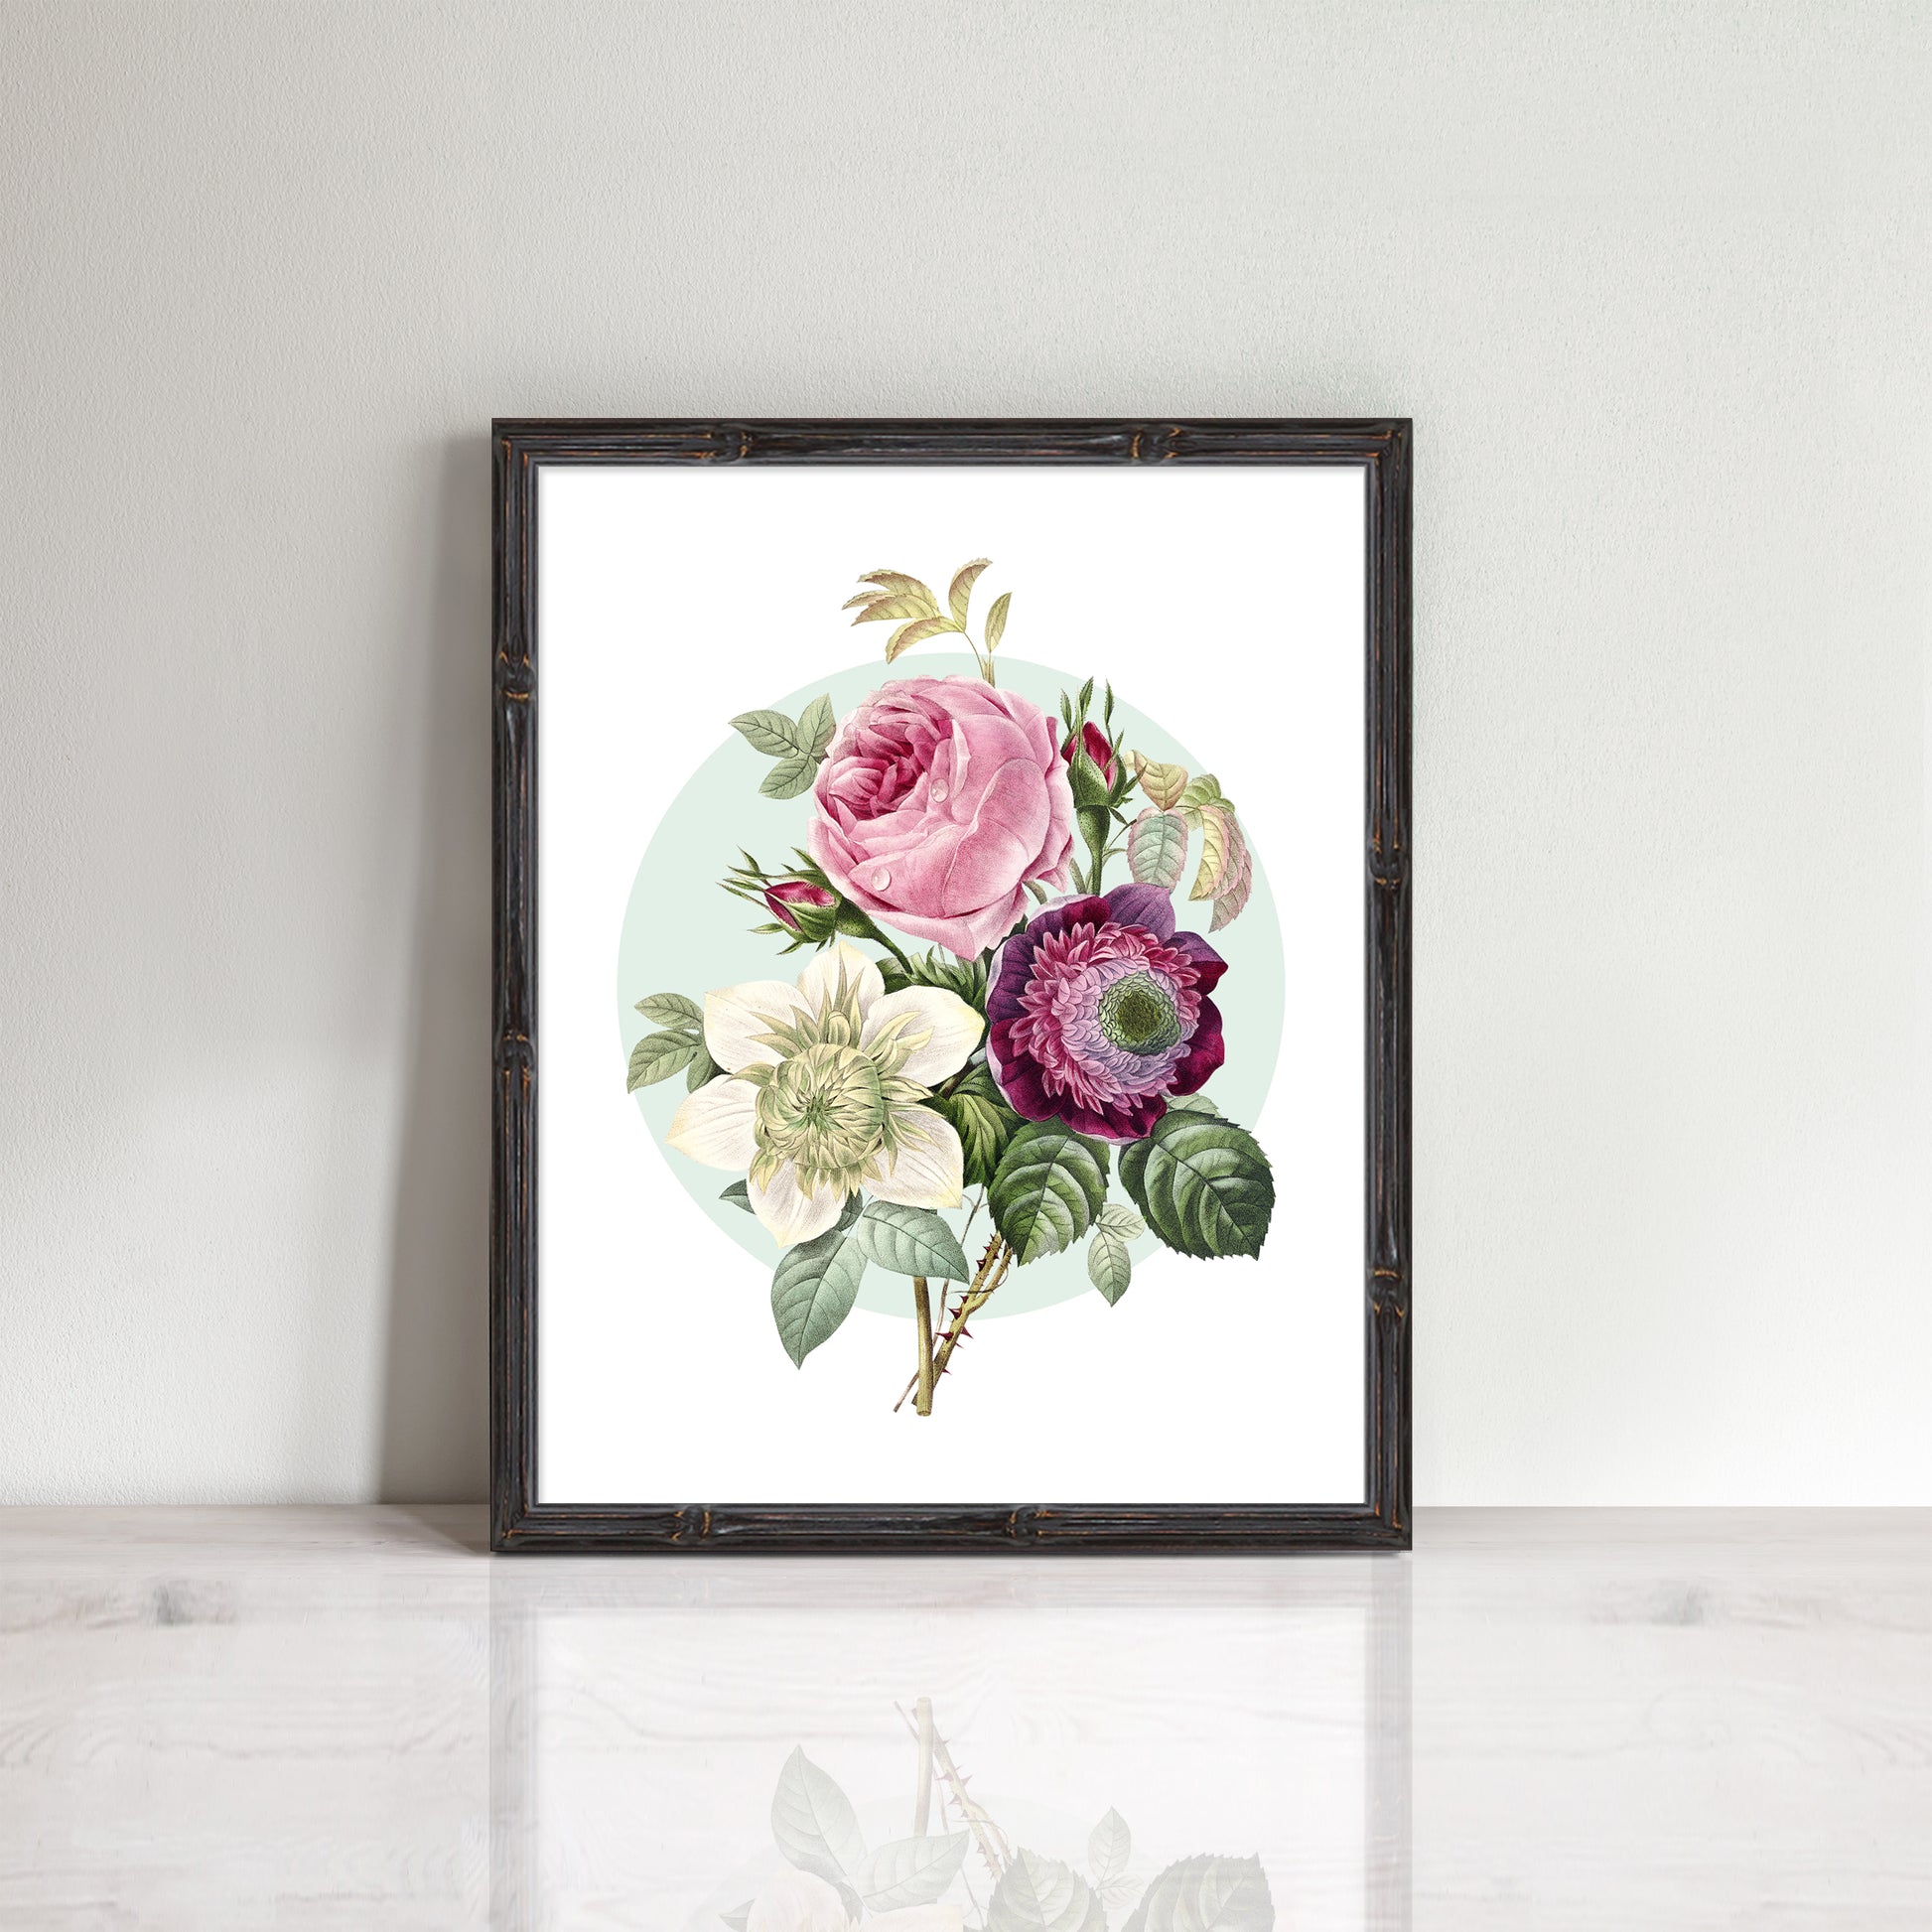 vintage print of bouquet of flowers with cabbage rose and anemone flower